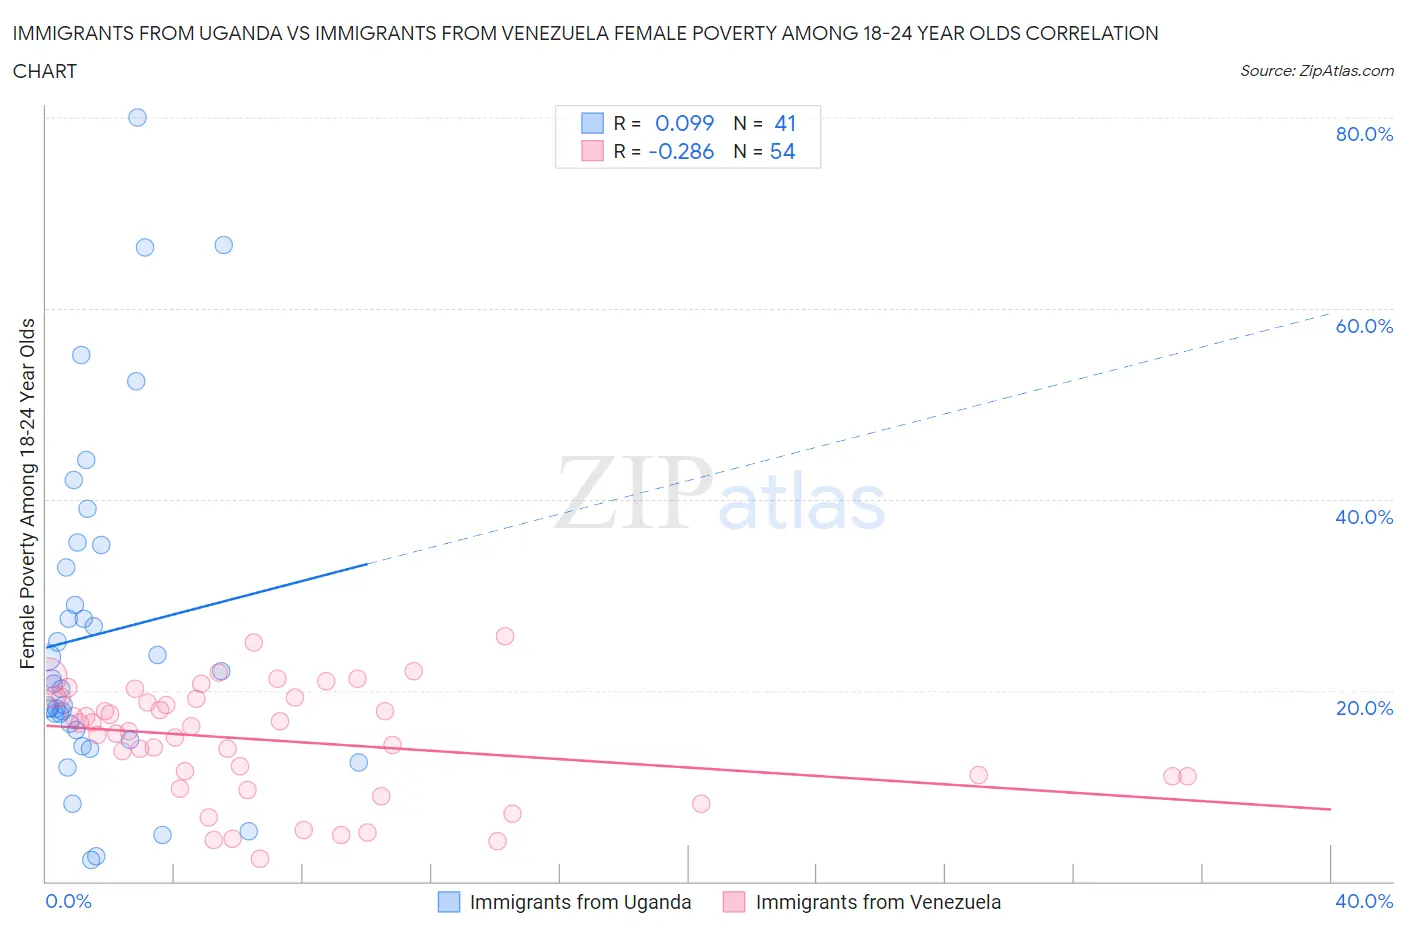 Immigrants from Uganda vs Immigrants from Venezuela Female Poverty Among 18-24 Year Olds